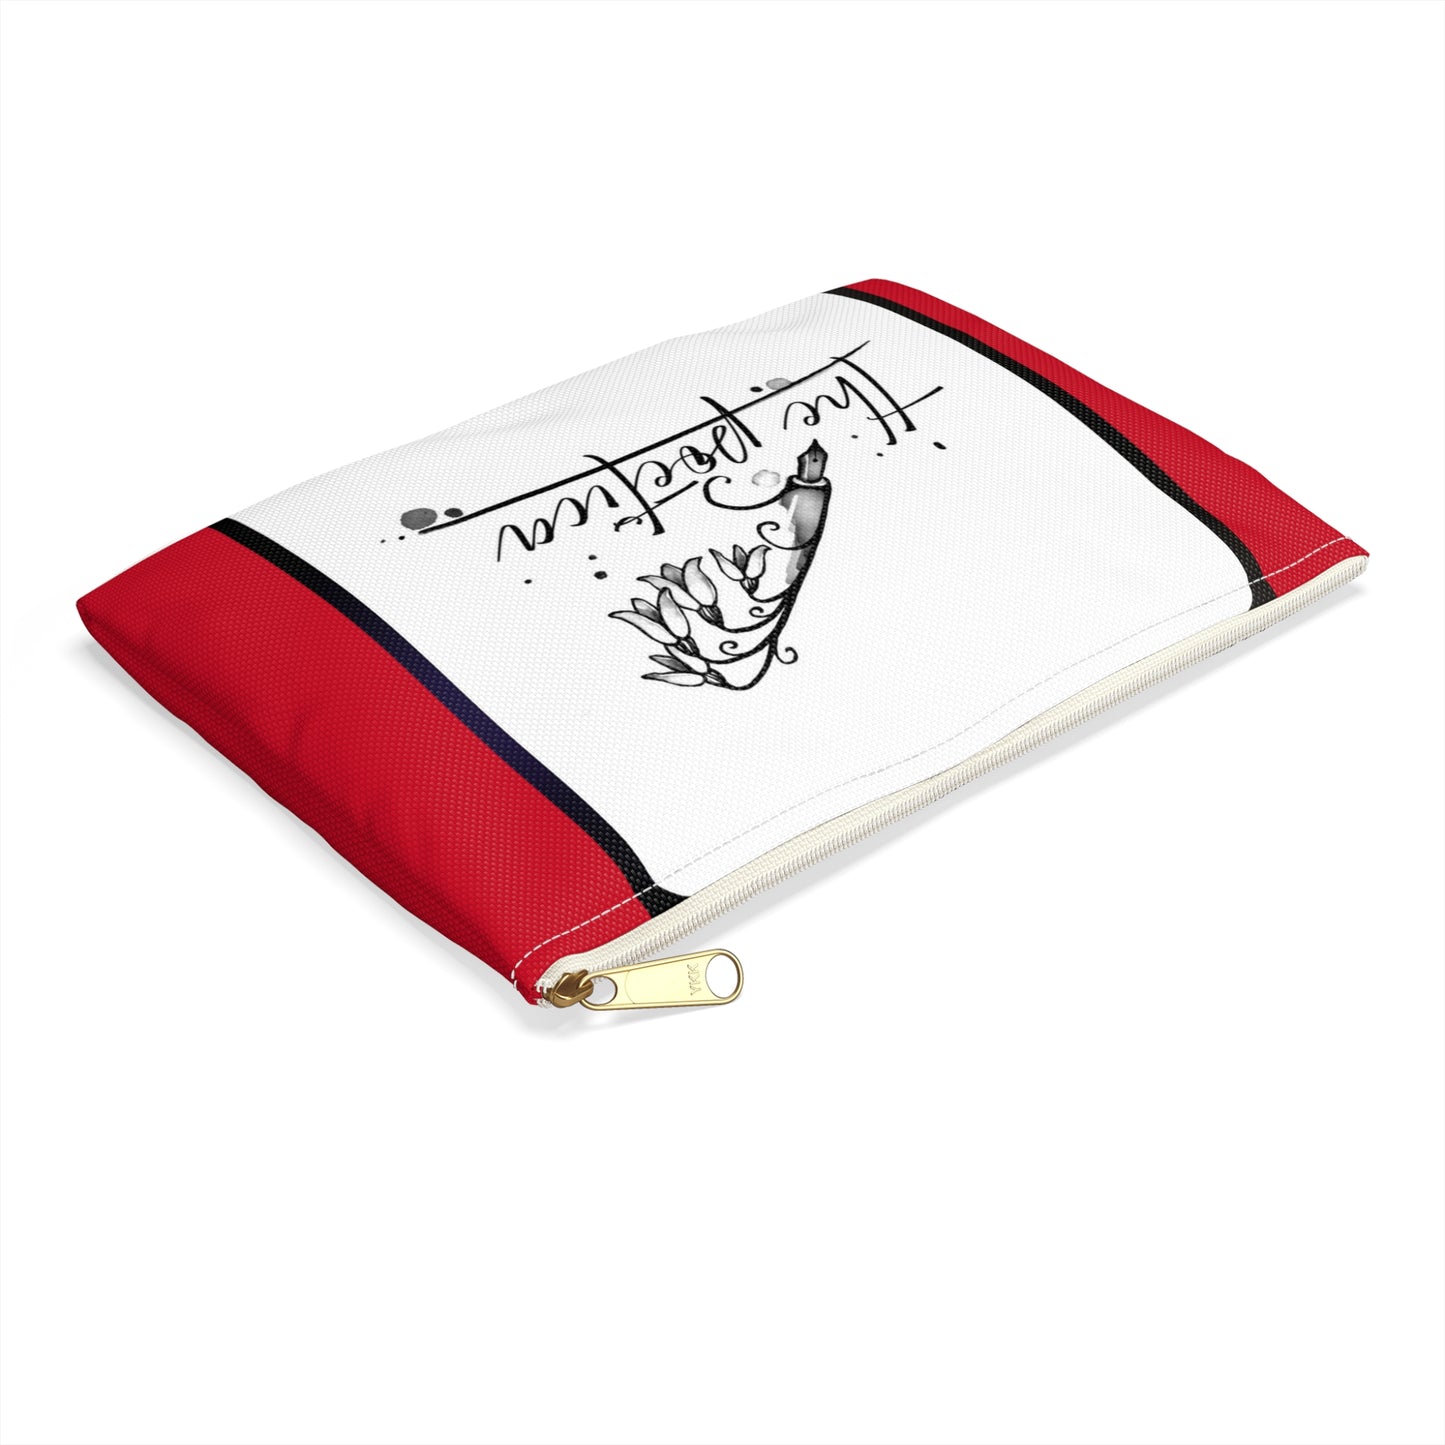 the poetica Cosmetic Pouch